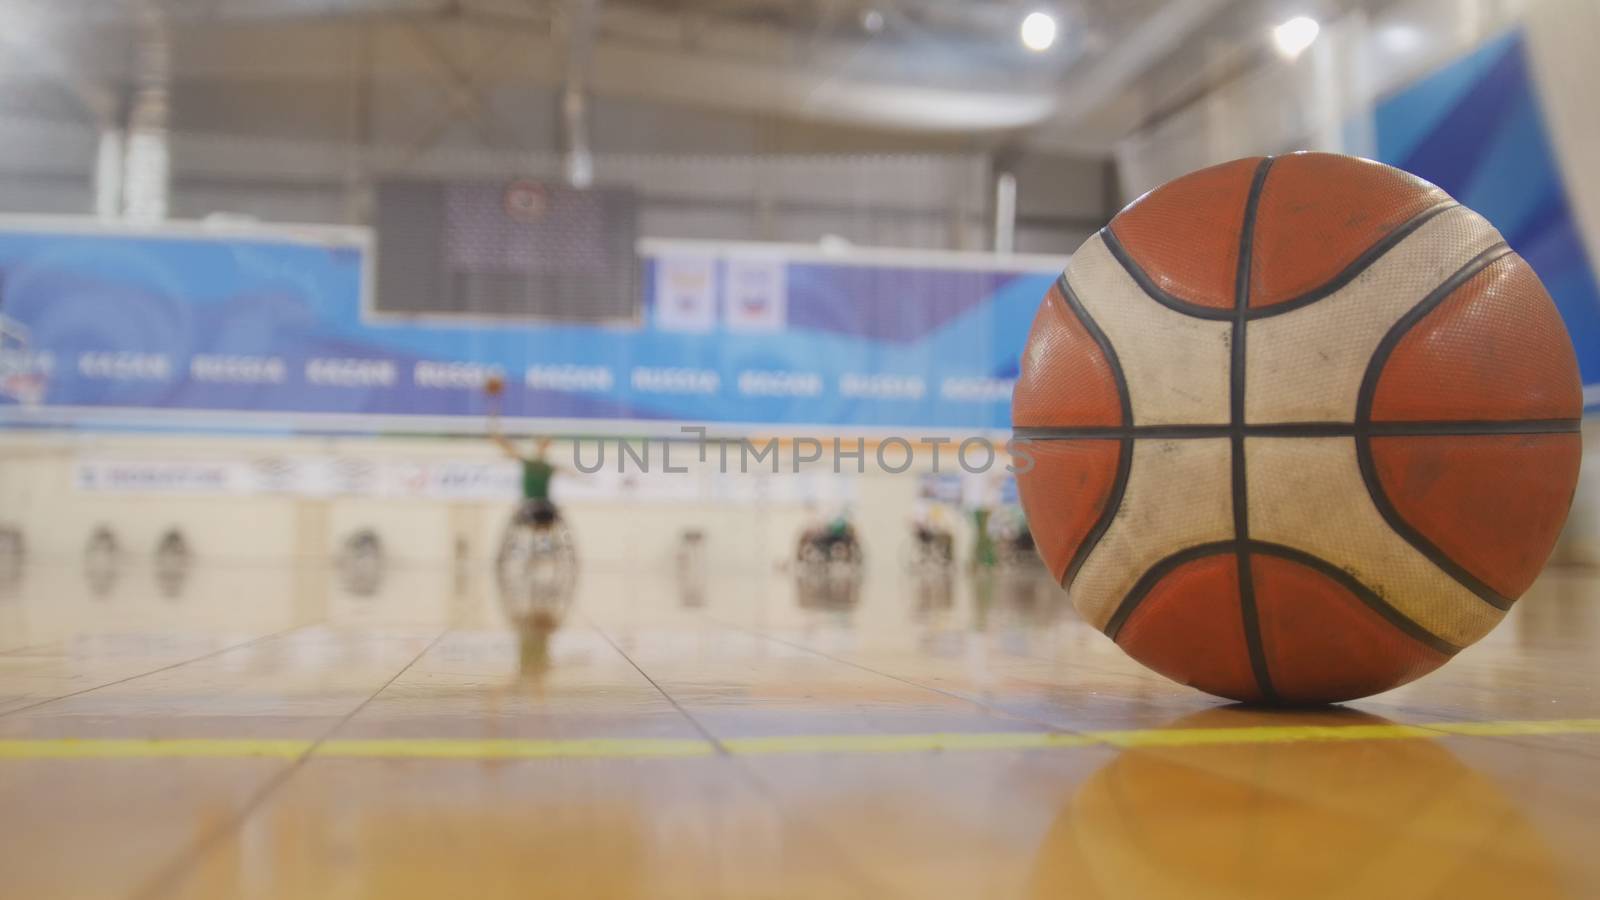 Training of disabled sportsmen - playing wheelchair basketball, wide angle